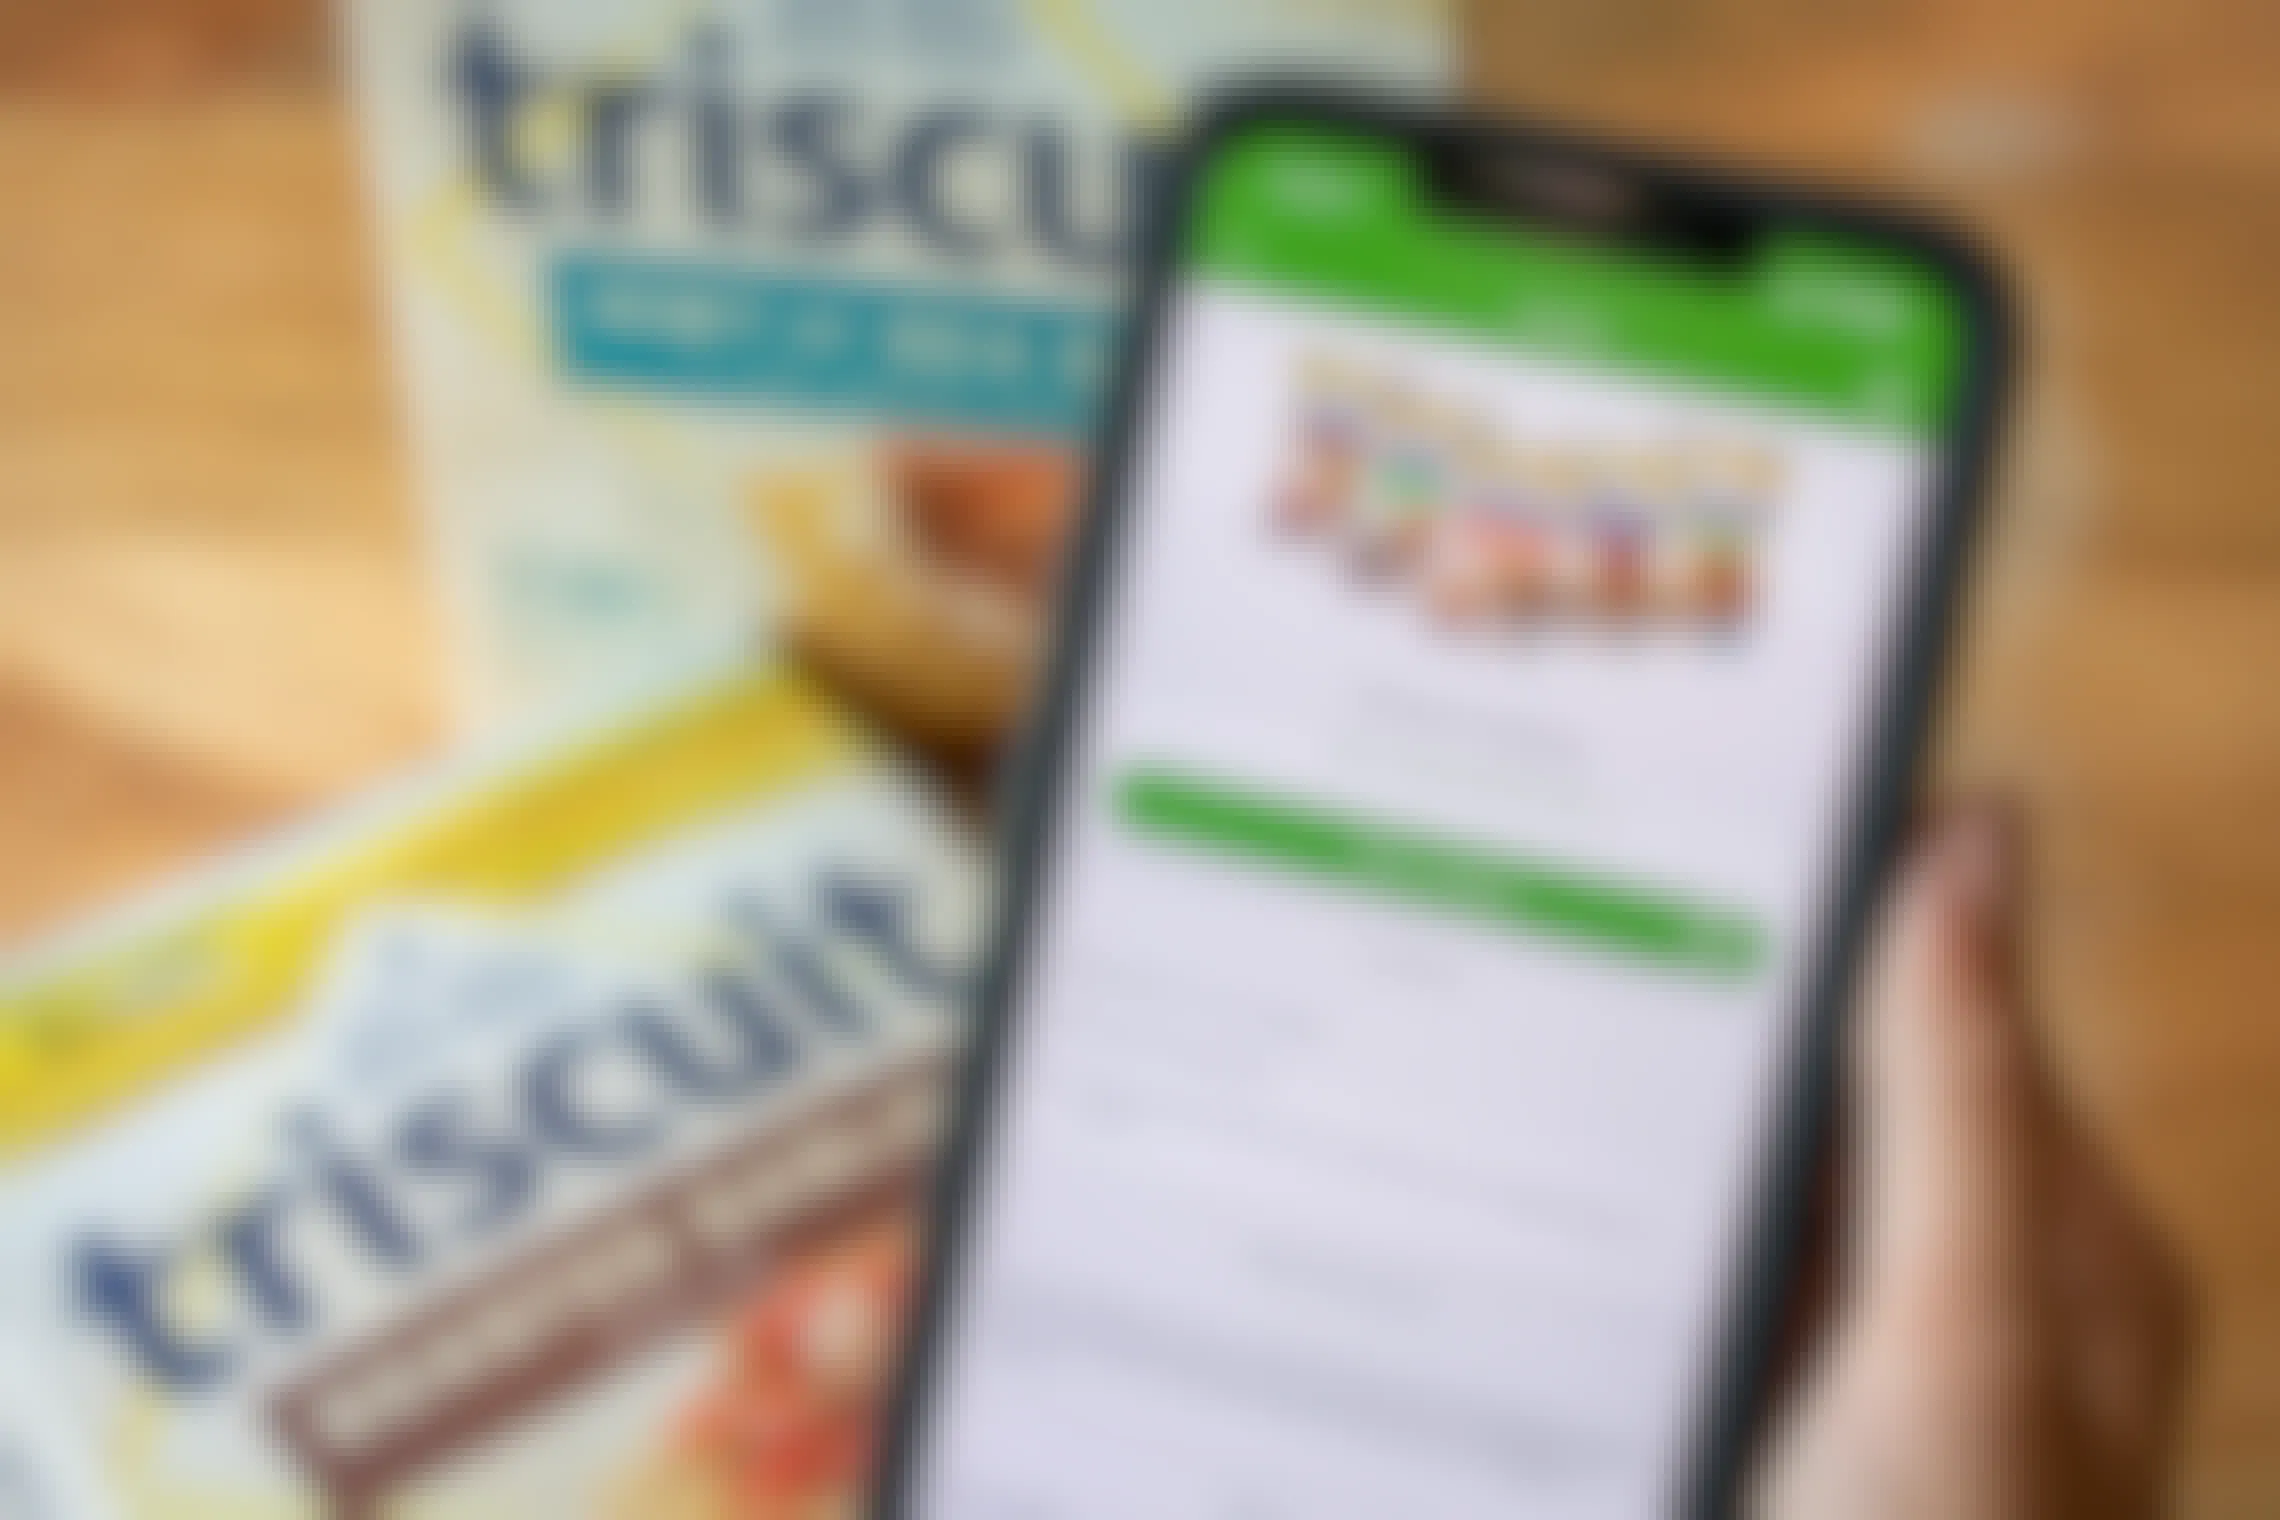 A person's hand holding an iPhone displaying the Checkout 51 mobile rebate app and an offer for Triscuit crackers that the user has claimed. In the background there are two boxes of Triscuit crackers sitting on the table.